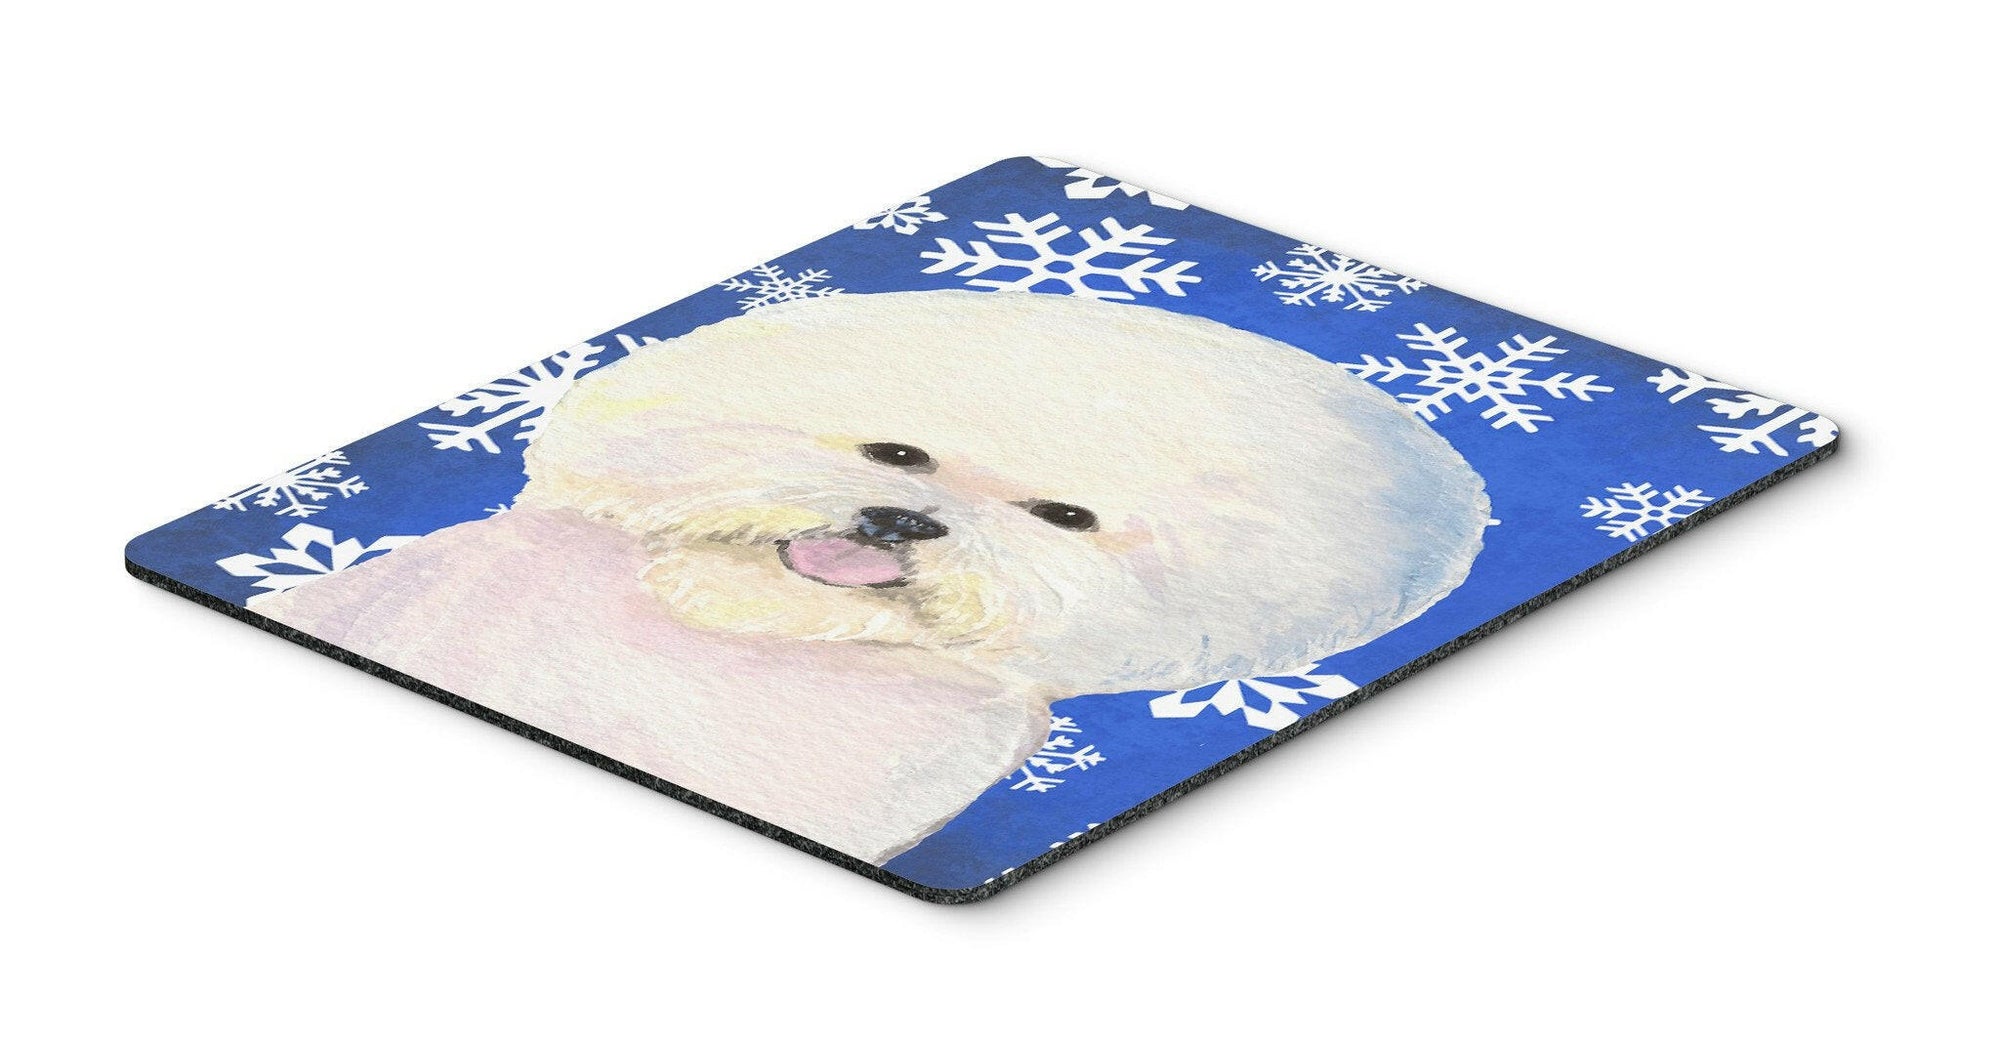 Bichon Frise Winter Snowflakes Holiday Mouse Pad, Hot Pad or Trivet by Caroline's Treasures